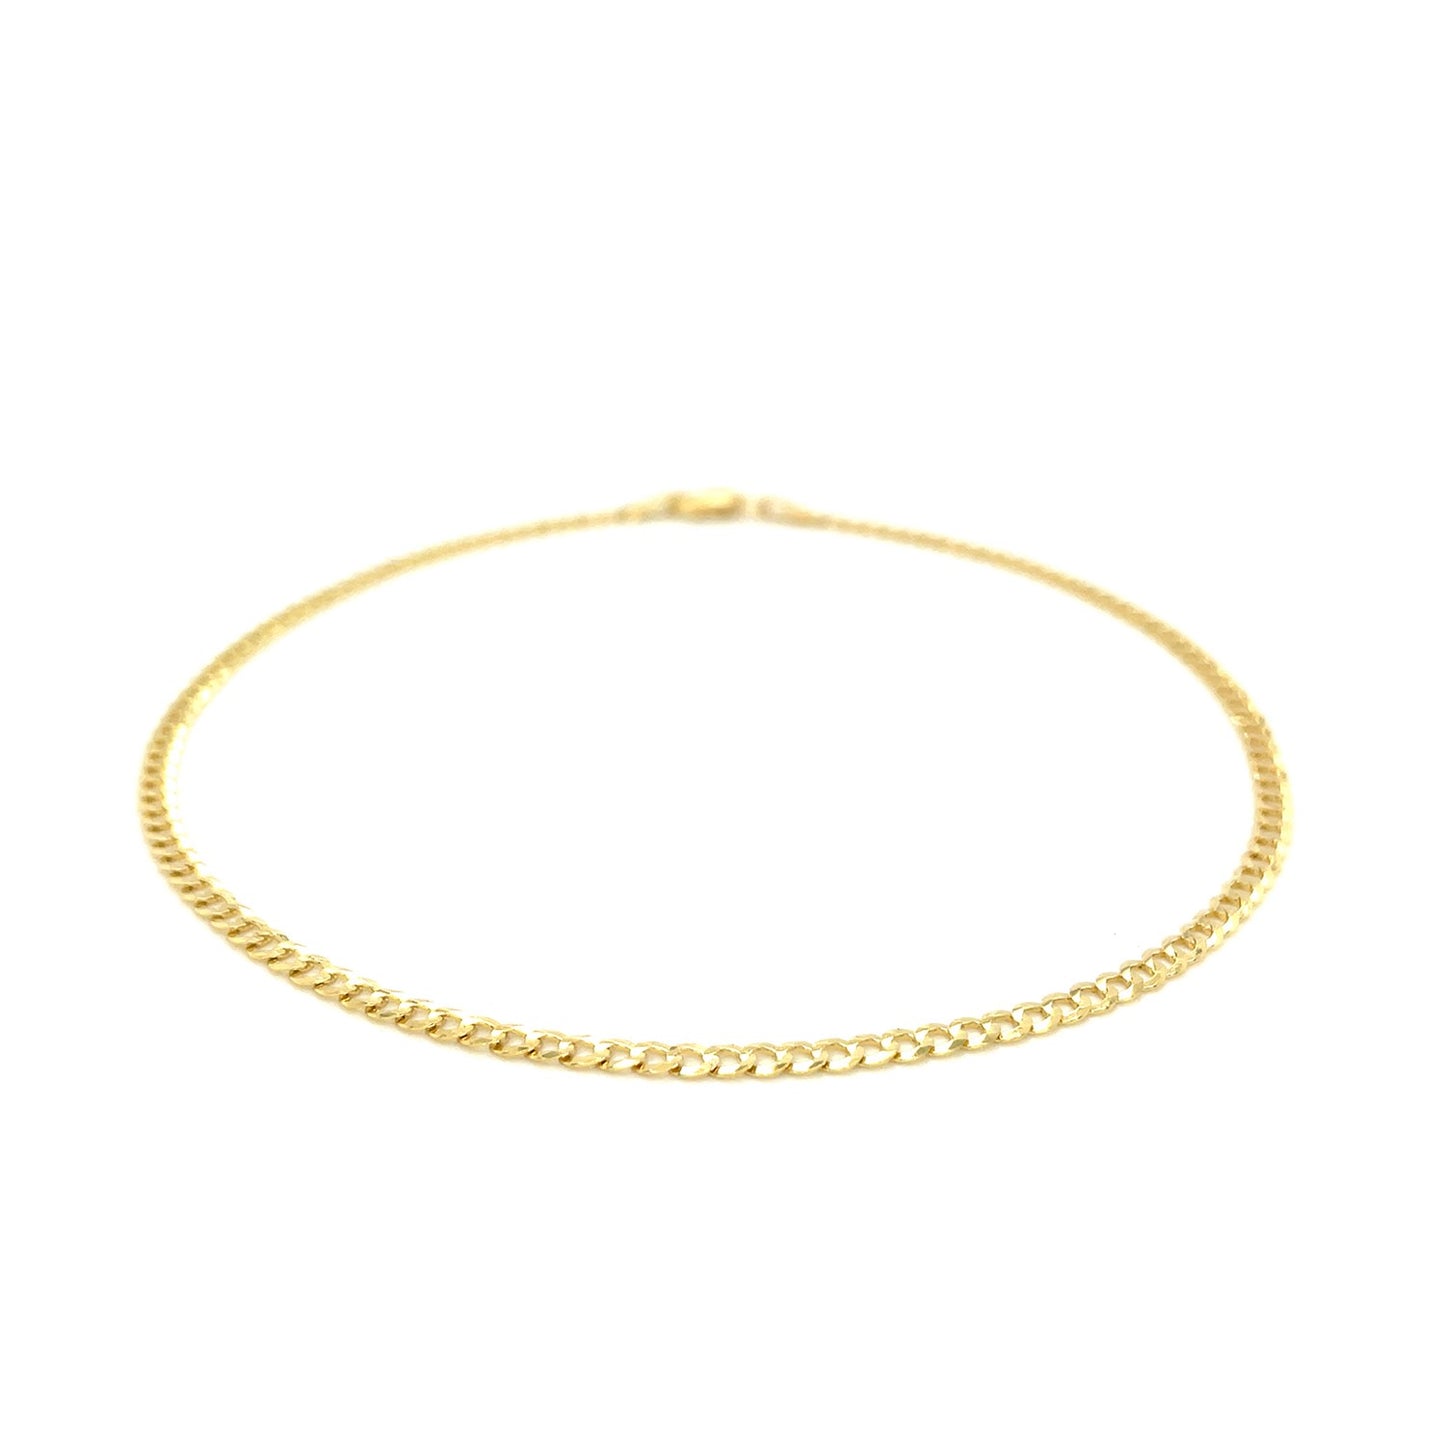 2.5mm 14k Yellow Gold Curb Link Anklet